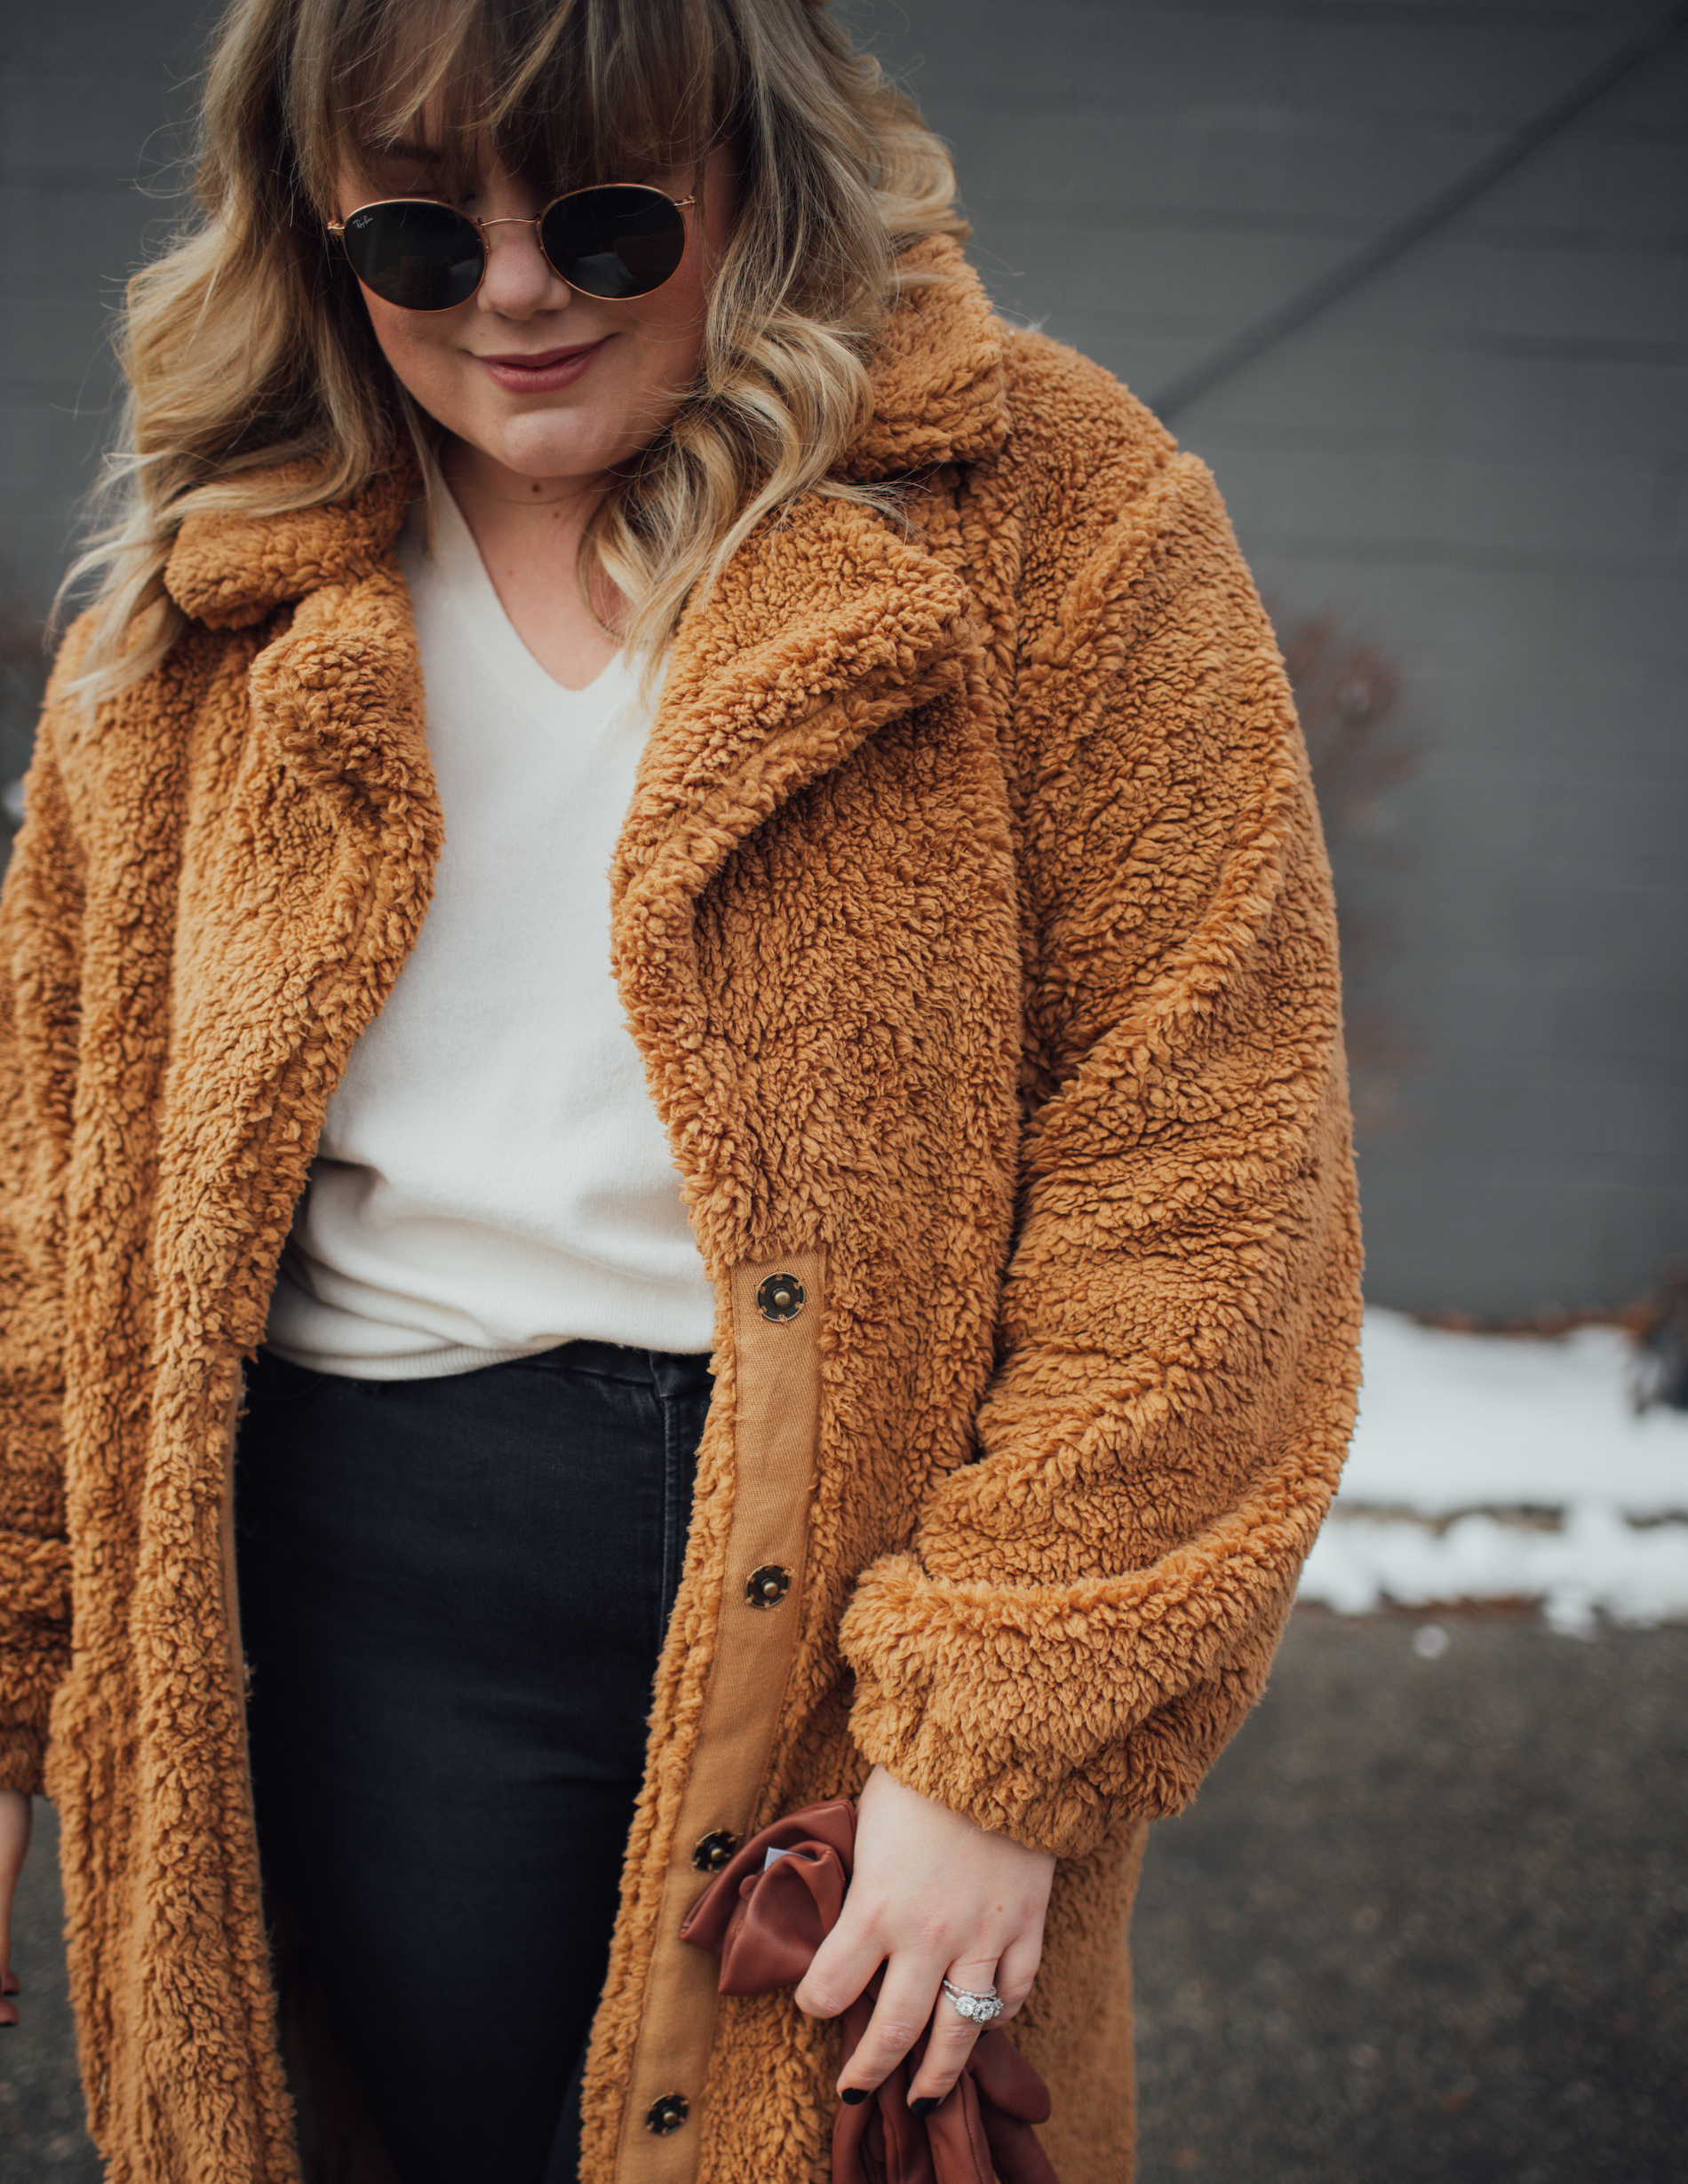 Dressing With Joy This Winter. Sharing a chic teddy bear coat look that coordinates perfectly with boots and gloves! 